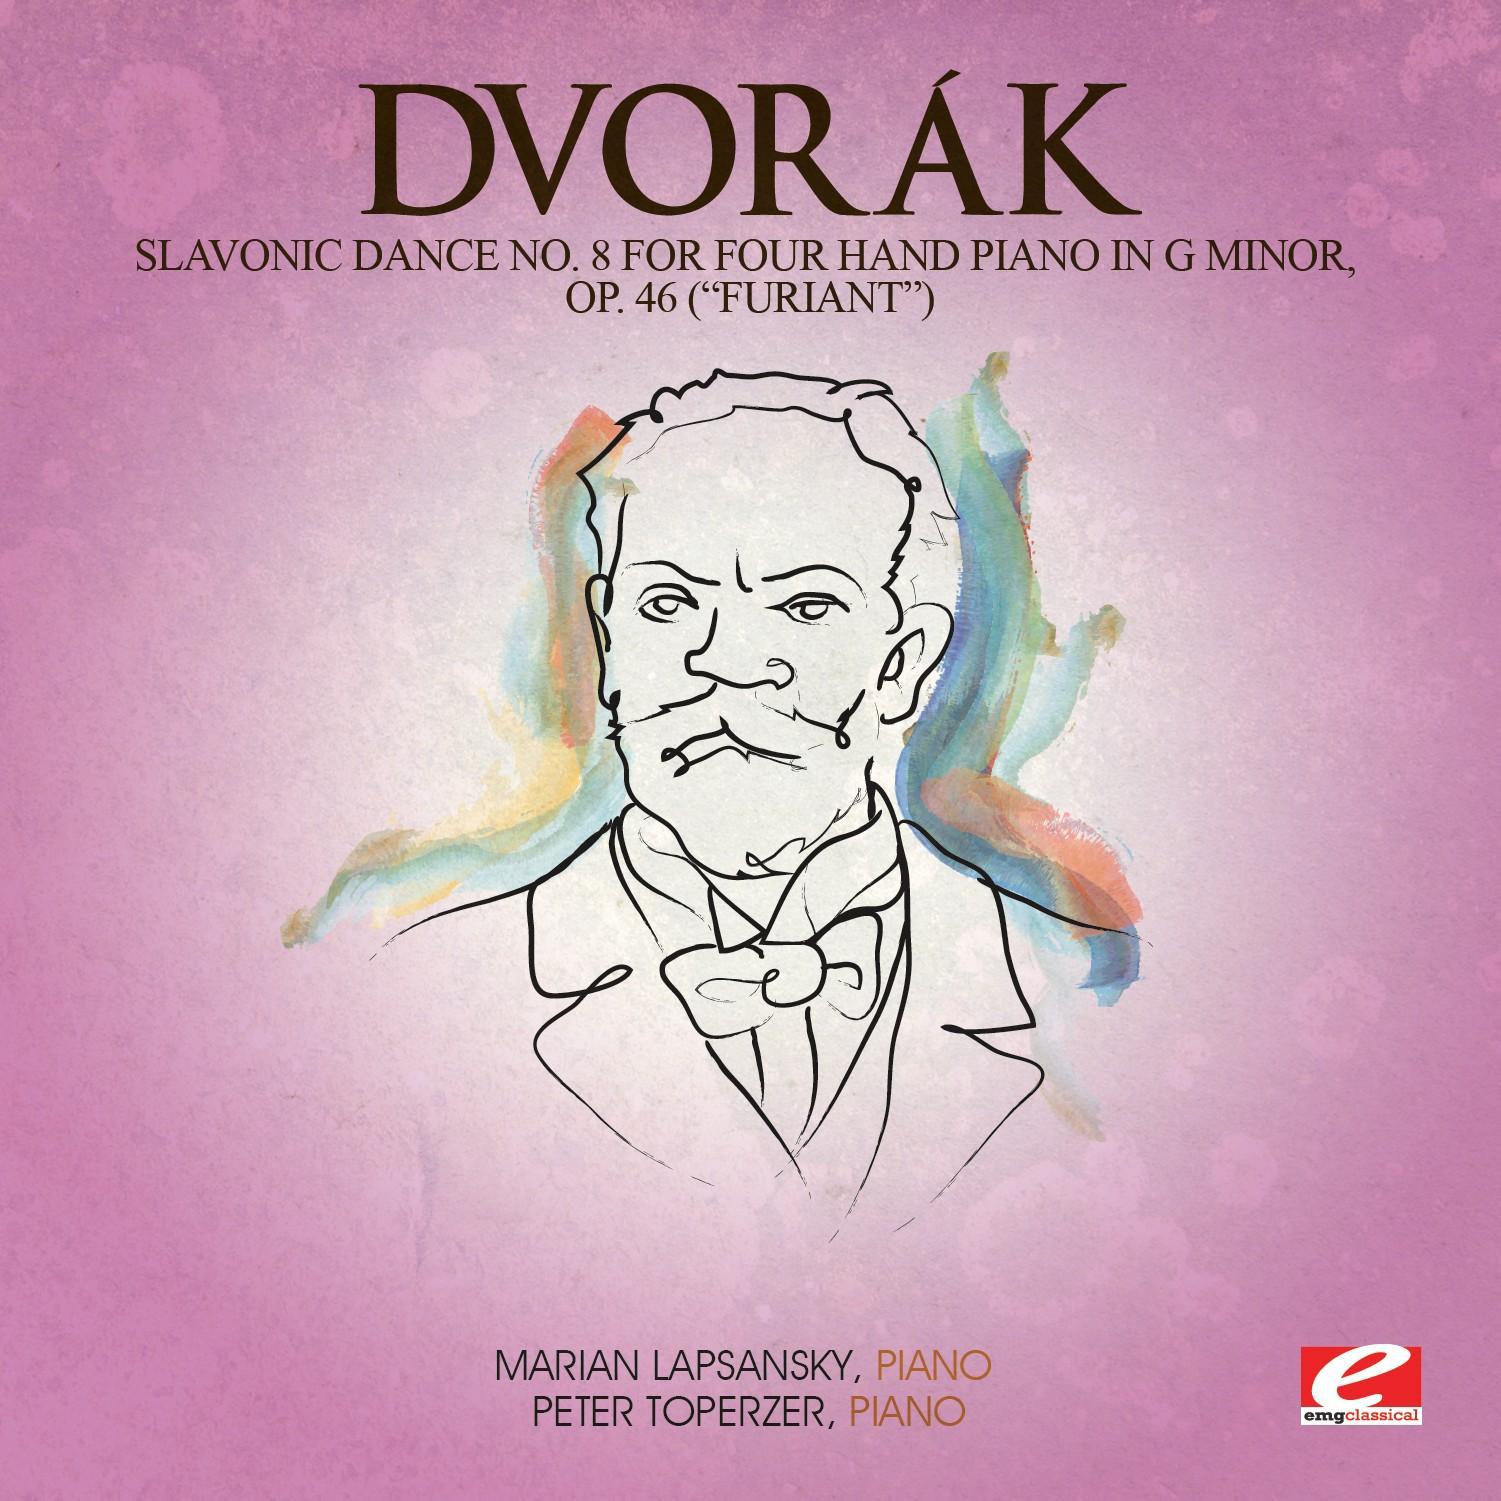 Slavonic Dance No. 8 for Four Hand Piano in G Minor, Op. 46 (Furiant)